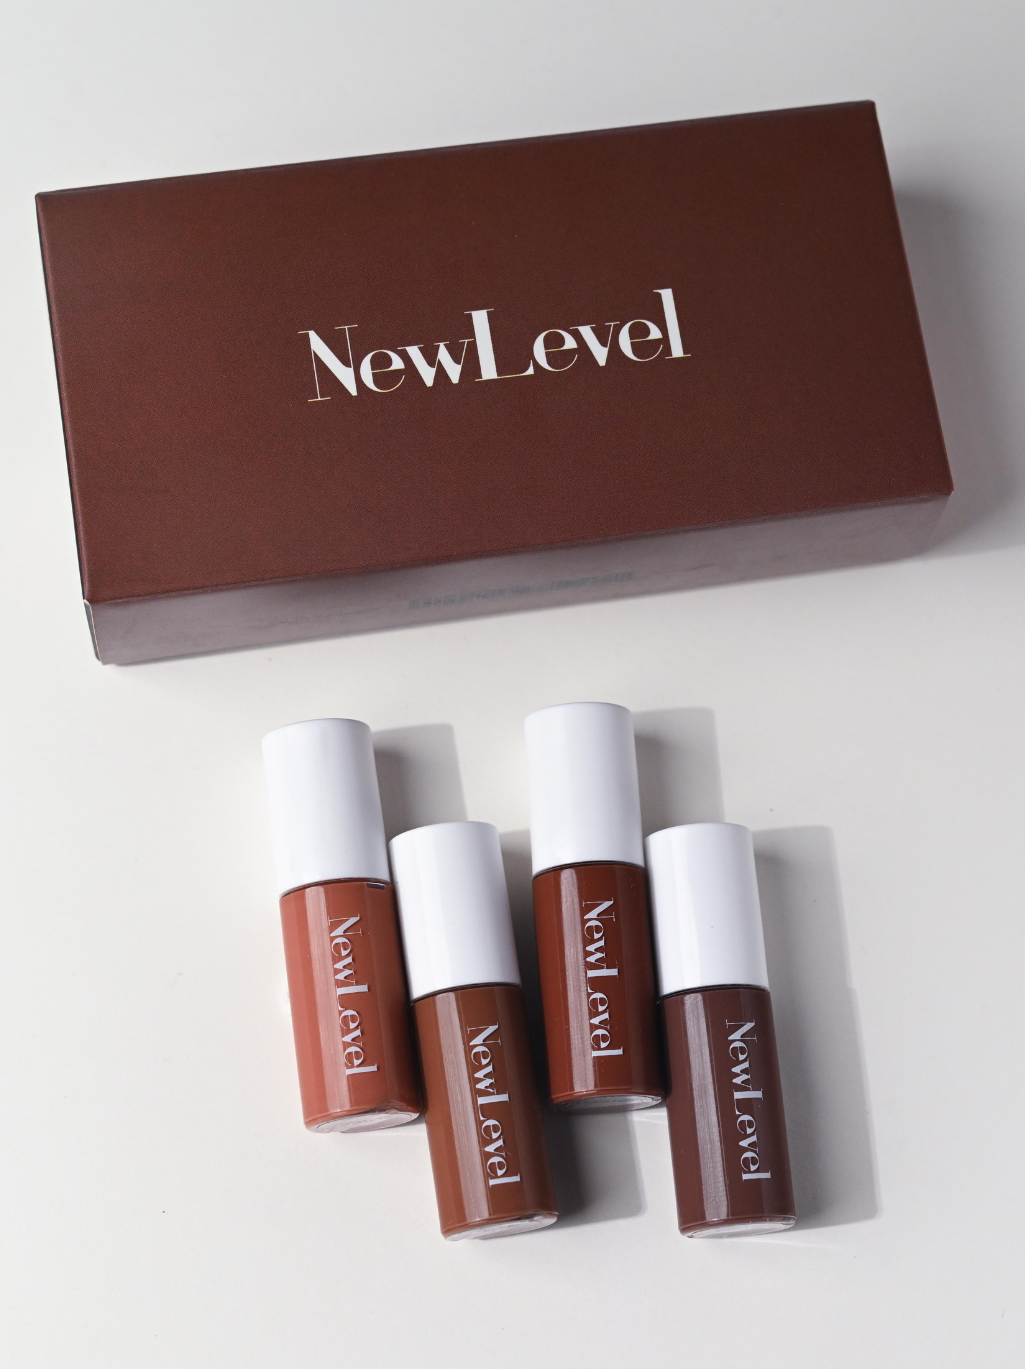 THE MINI CHOCOLATE BUTTER LIP GLOSS SET- LIMITED EDITION (PRE-ORDER SHIPS FROM 20TH MAY 2024)